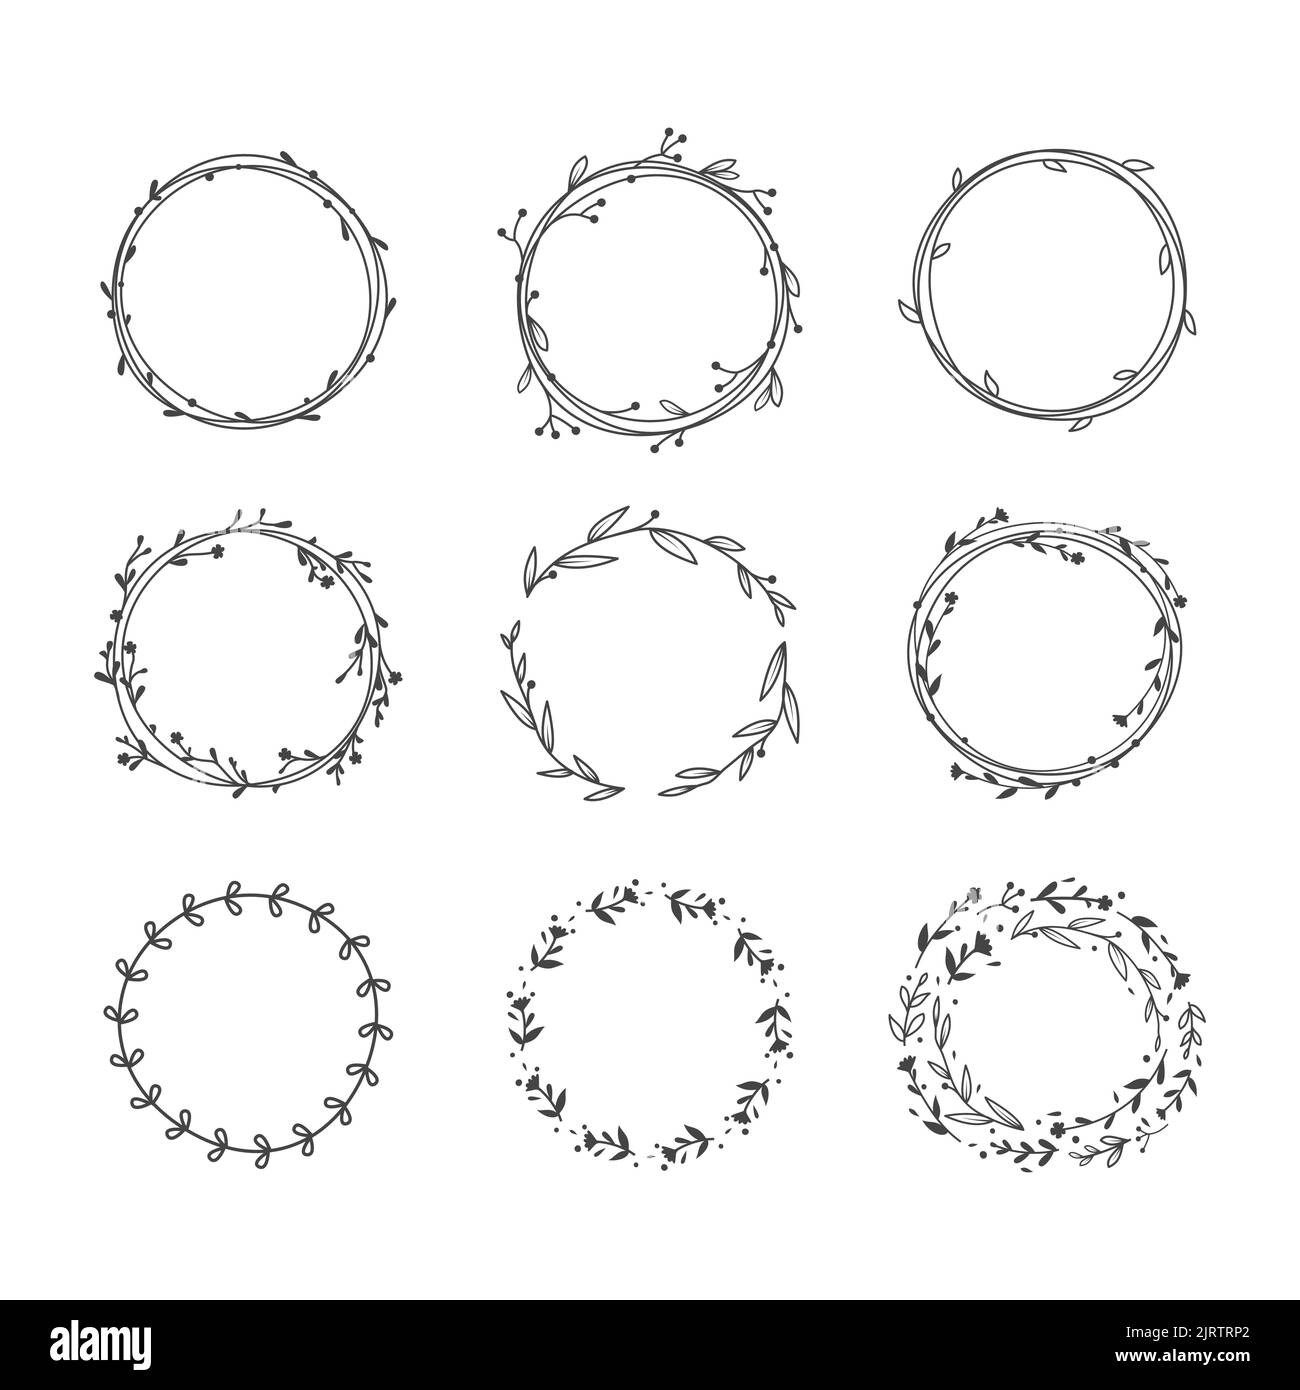 Floral circle wreath frame vector template. Branches, leaves and